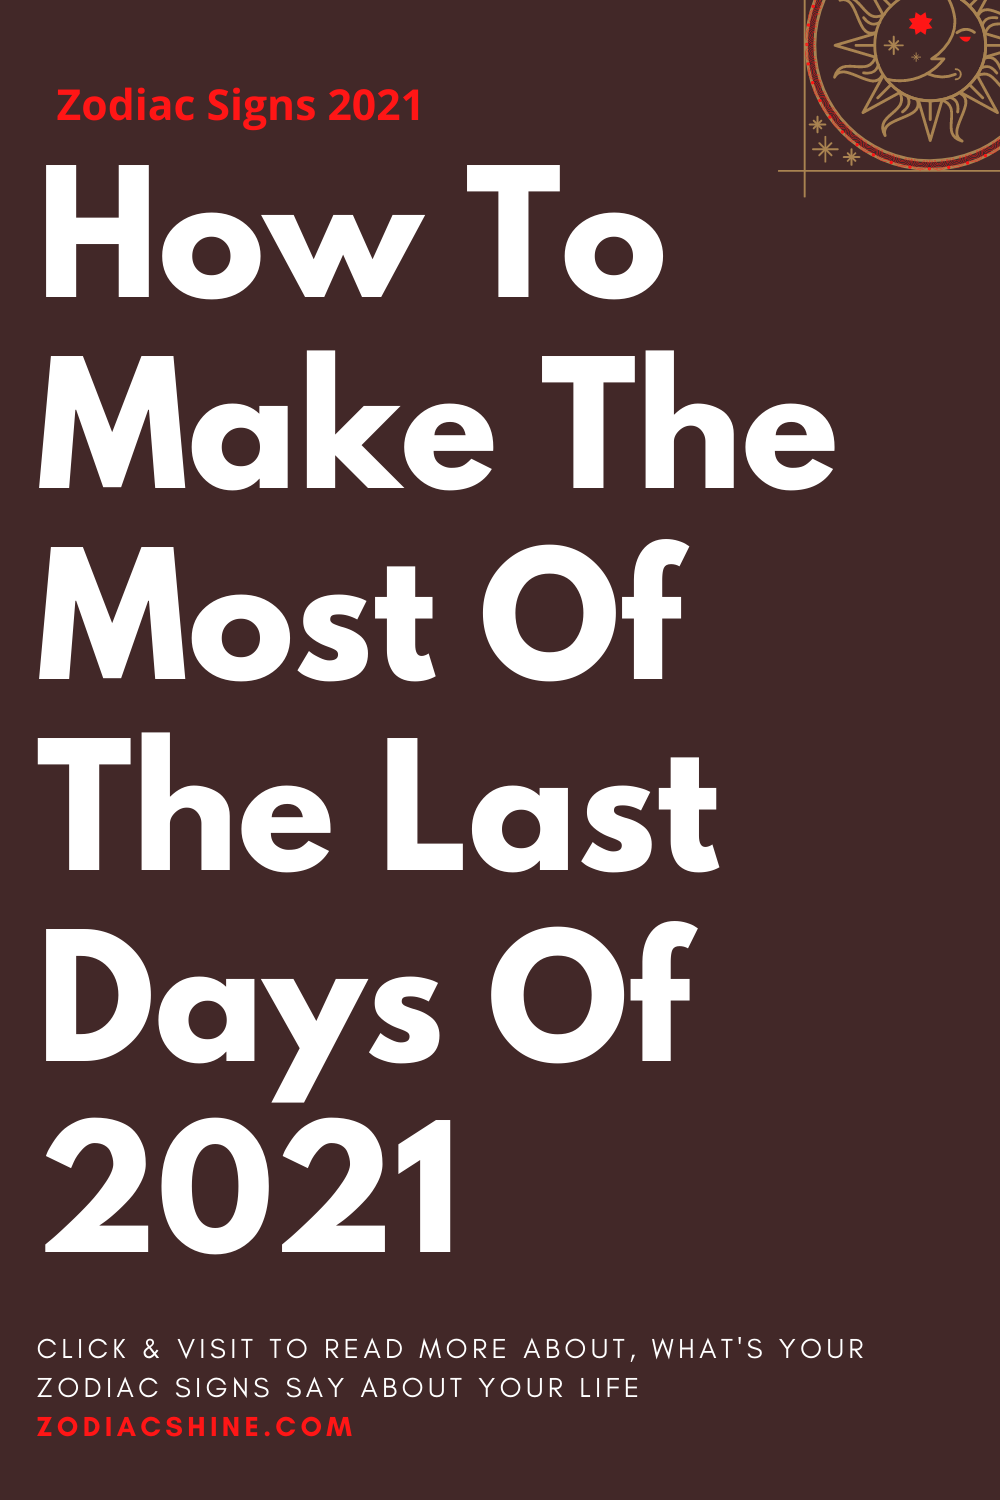 How To Make The Most Of The Last Days Of 2021